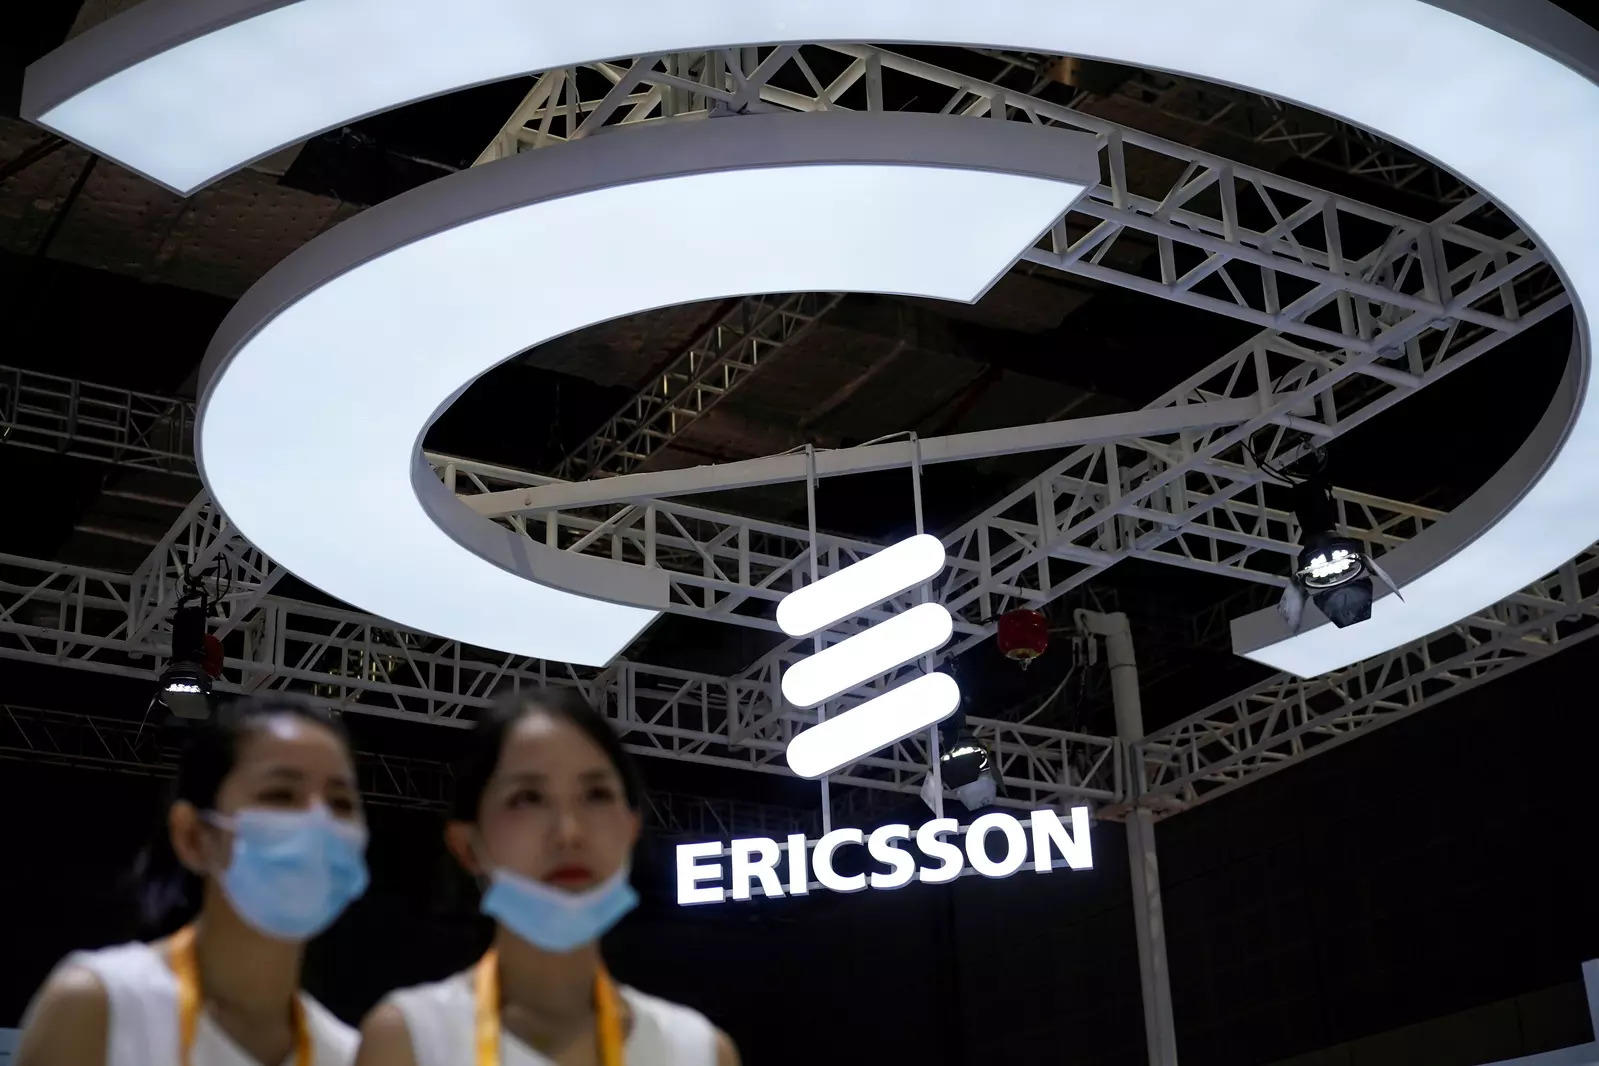 Ericsson bags nationwide 5G network deal from Malaysia’s Digital Nasional Berhad